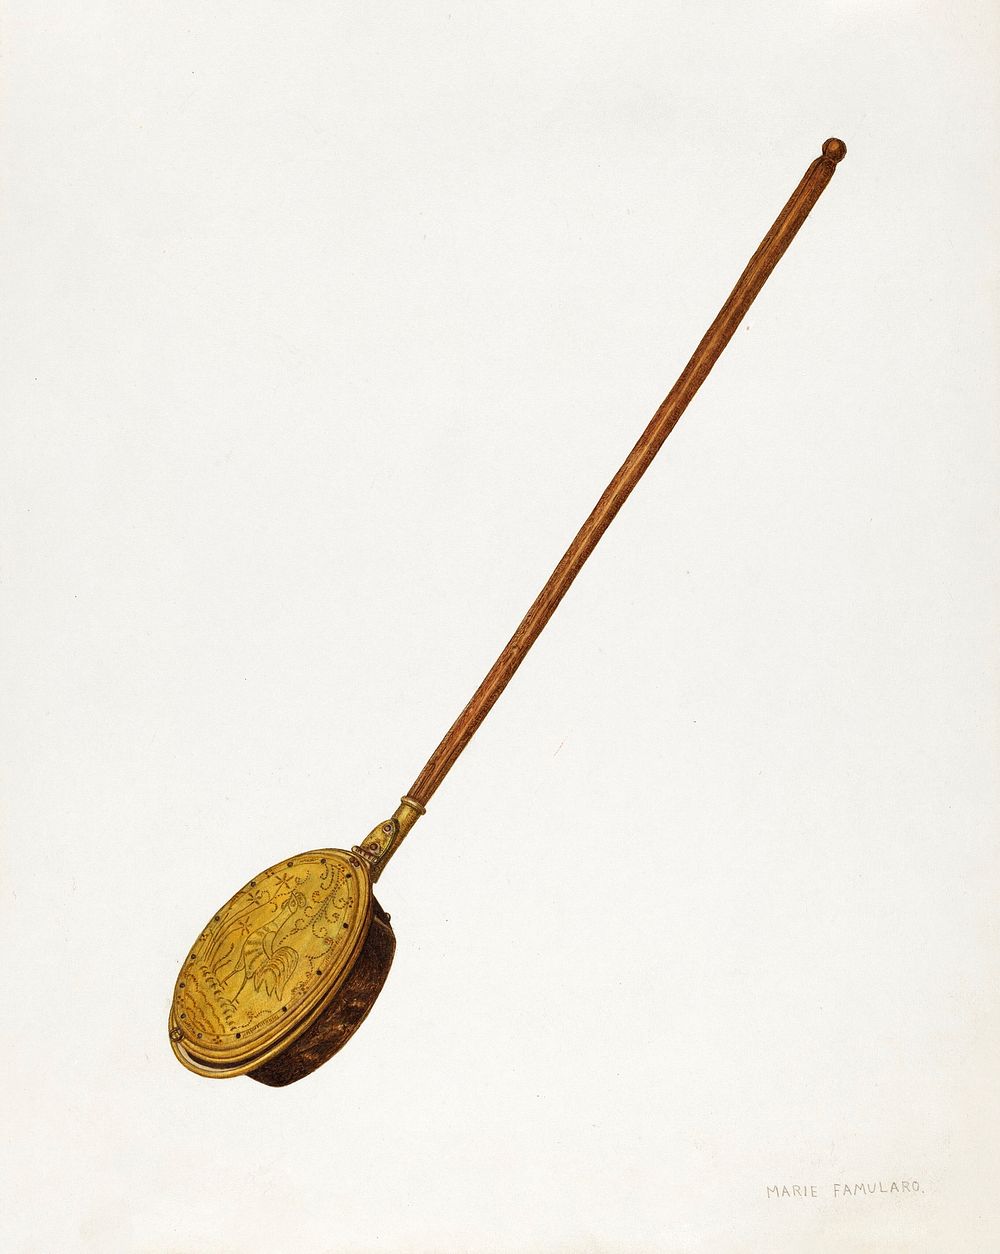 Warming Pan (ca.1937) by Marie Famularo. Original from The National Gallery of Art. Digitally enhanced by rawpixel.